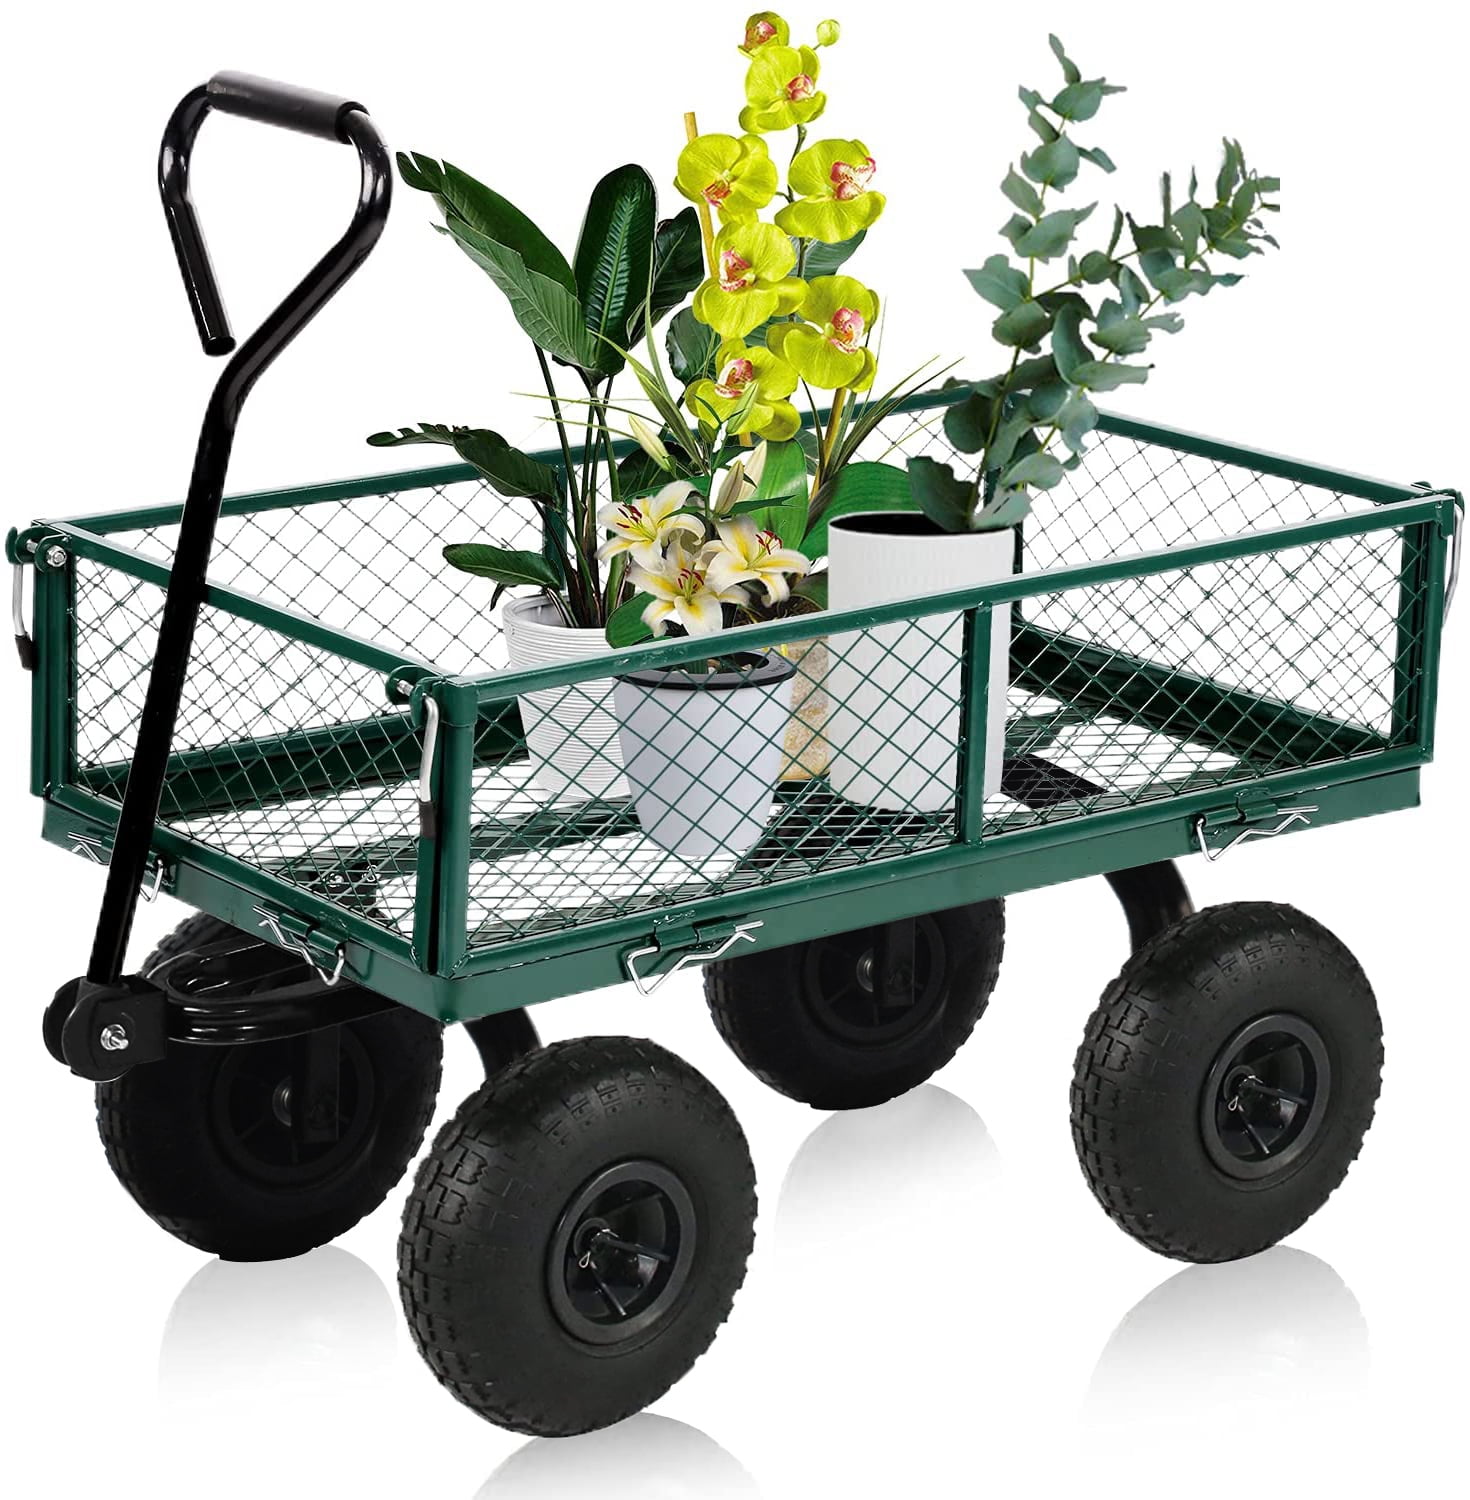 UK STOCK Cooshional Sturdy Steel Mesh Garden Trolley/Cart with Linier and 4 Big Wheels 300Kg Load Capacity Heavy Duty Garden Trolley Cart with Removable Folding Sides